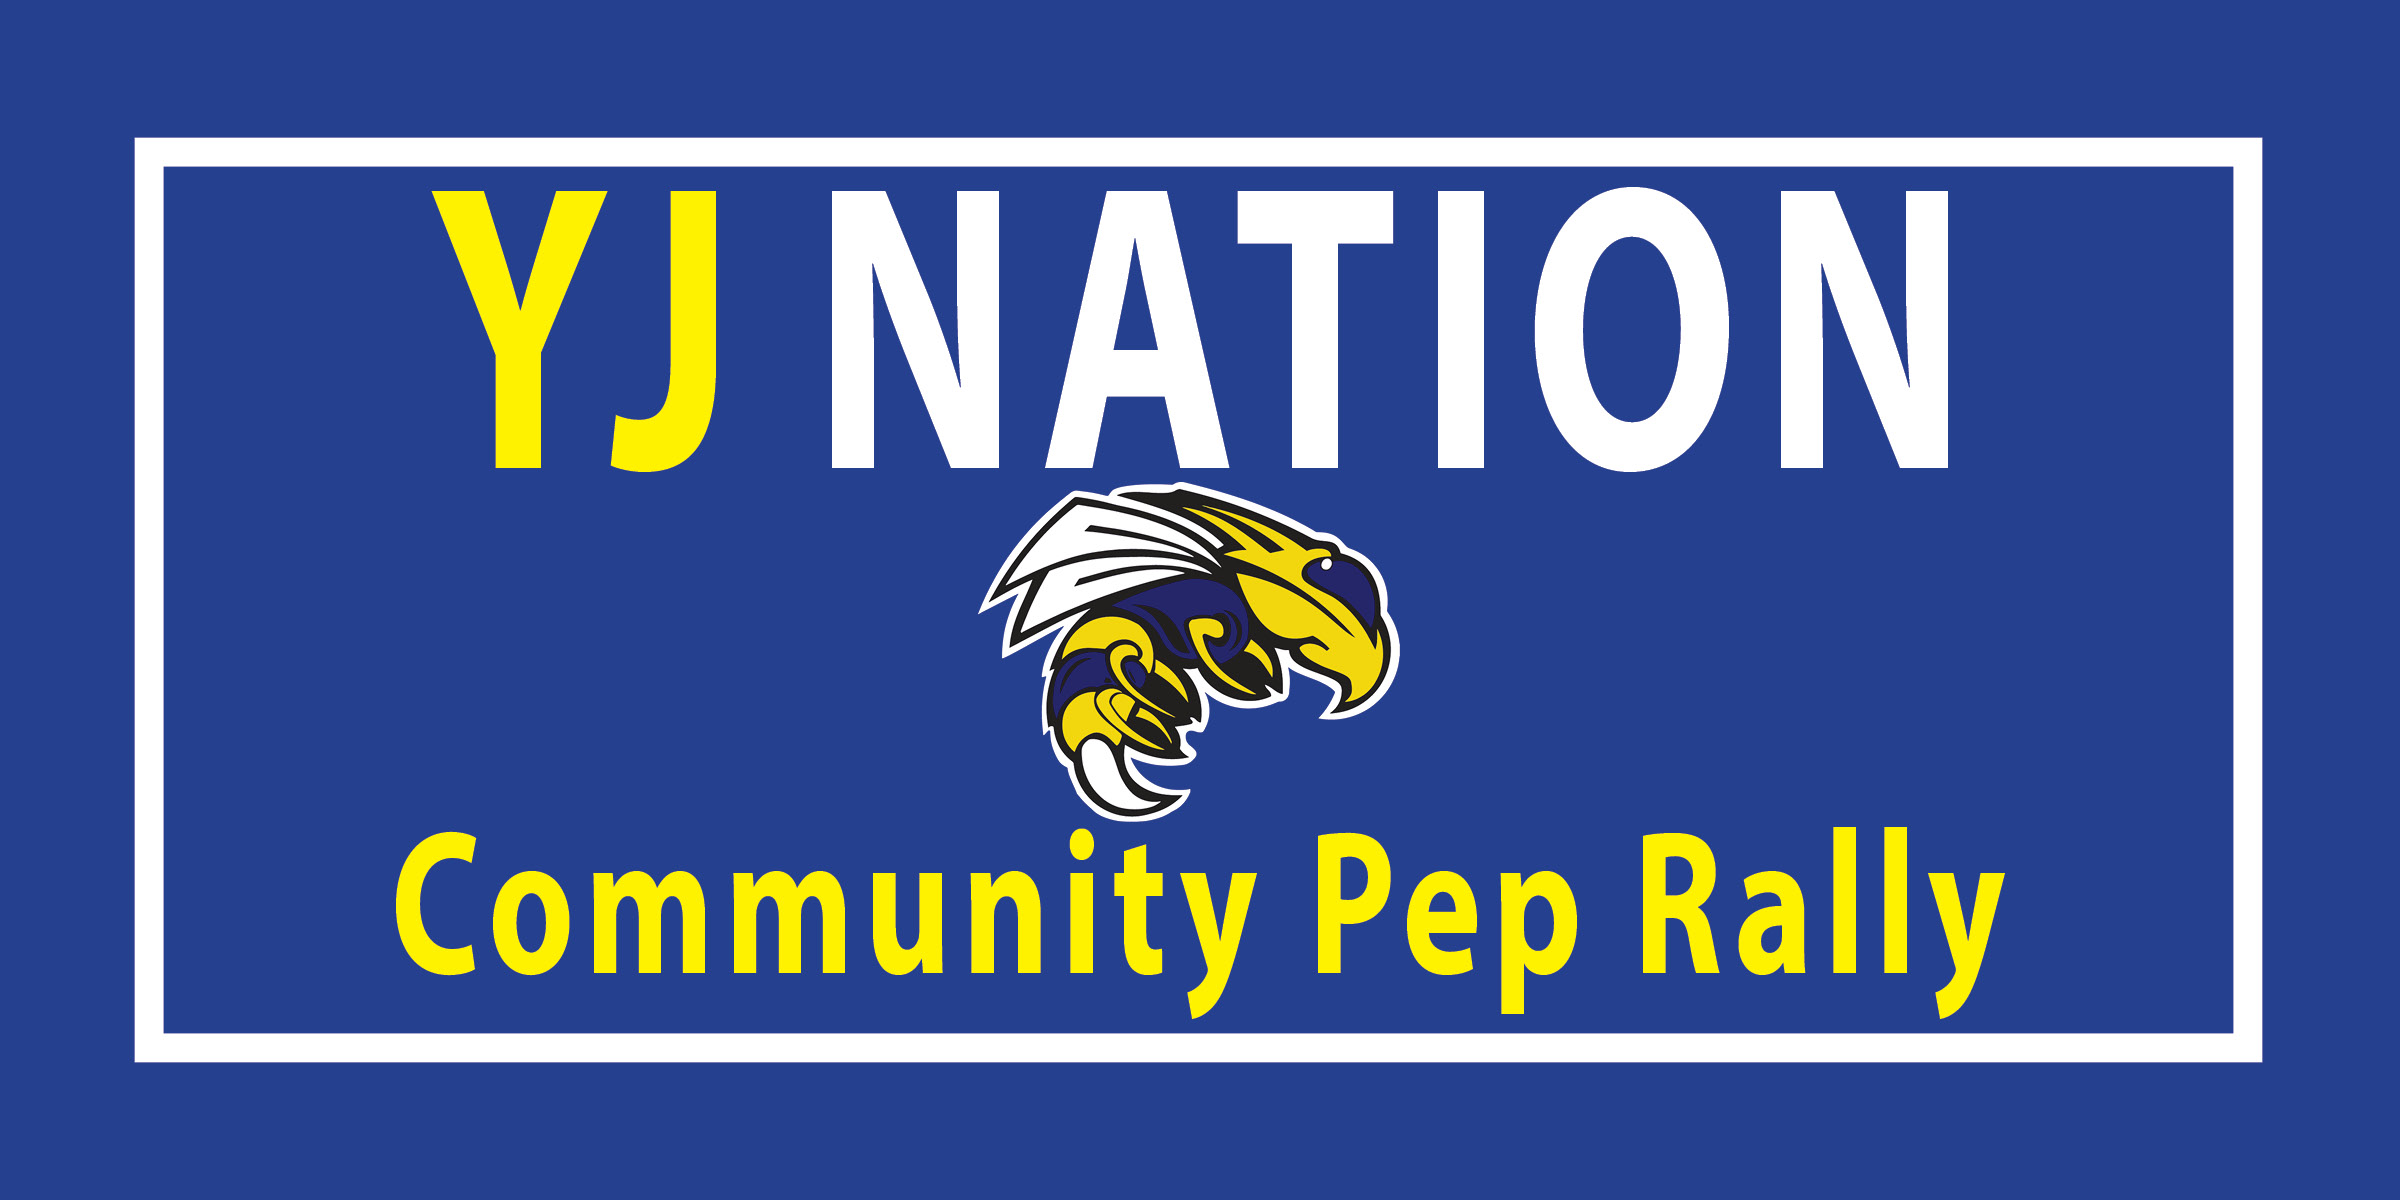 Infographic stating community pep rally for YJ Nation